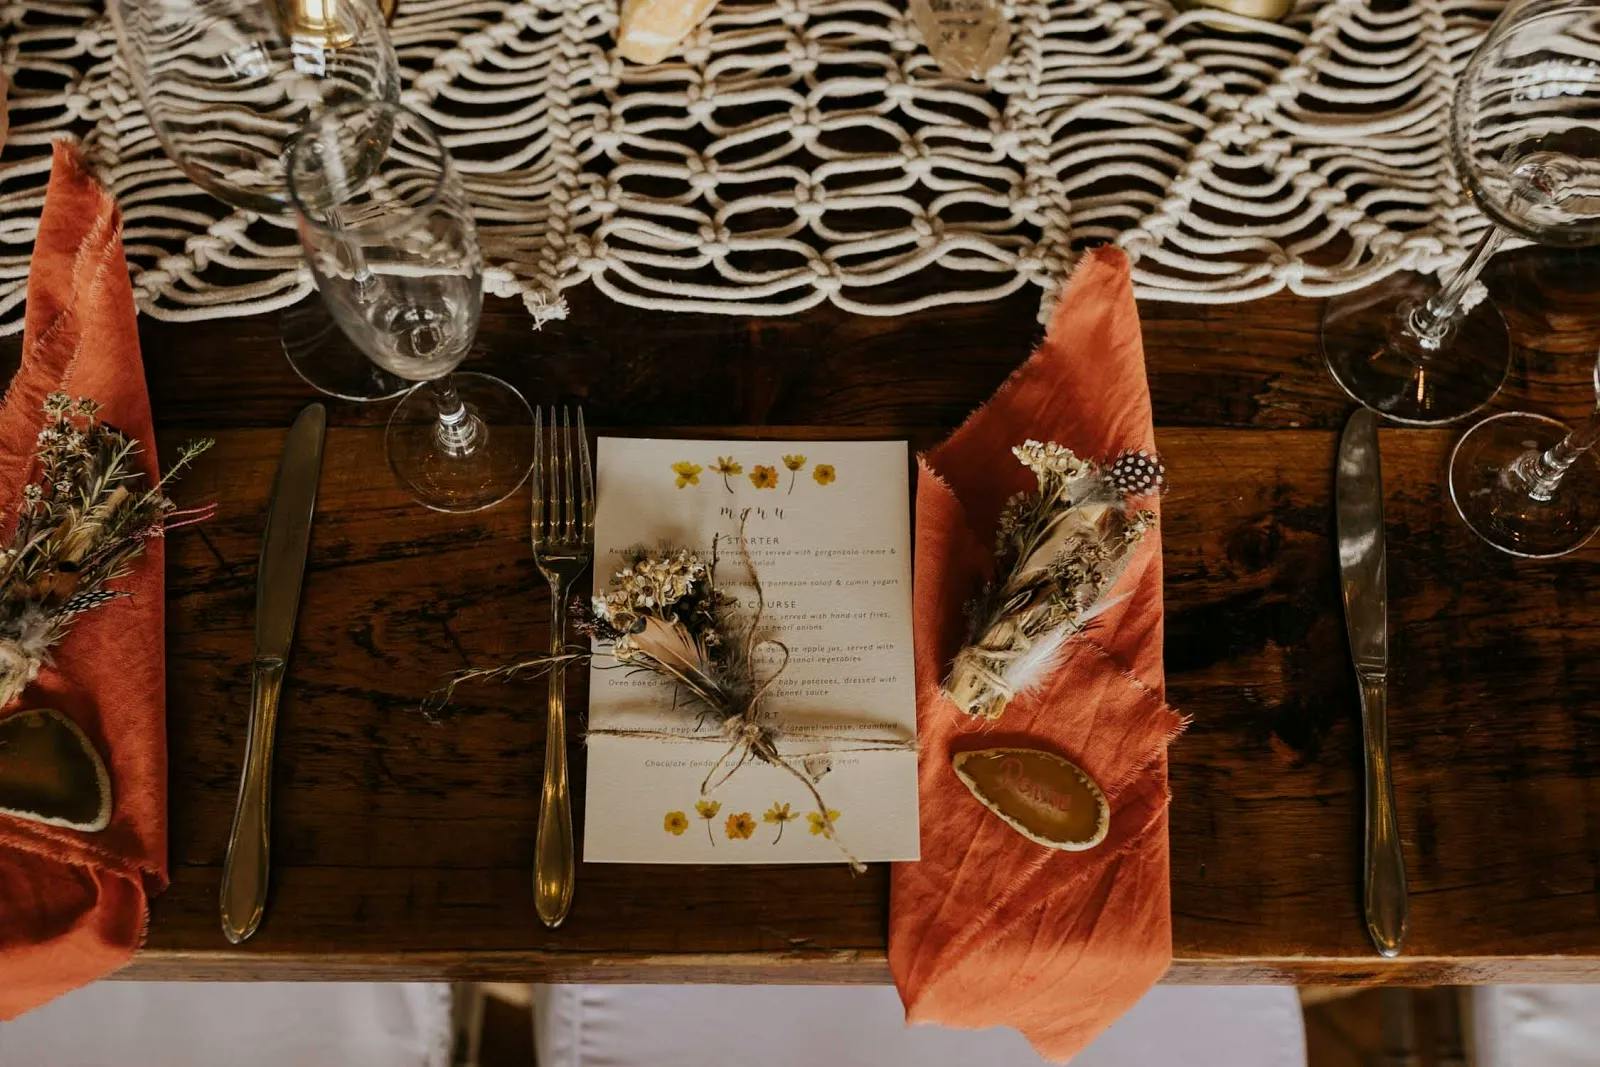 A rustic wooden dining table set for an event with elegant tableware. The setup includes a menu card decorated with dried flowers, gold cutlery, orange napkins, glasses, and small decorative items. A macrame table runner adds a bohemian touch.